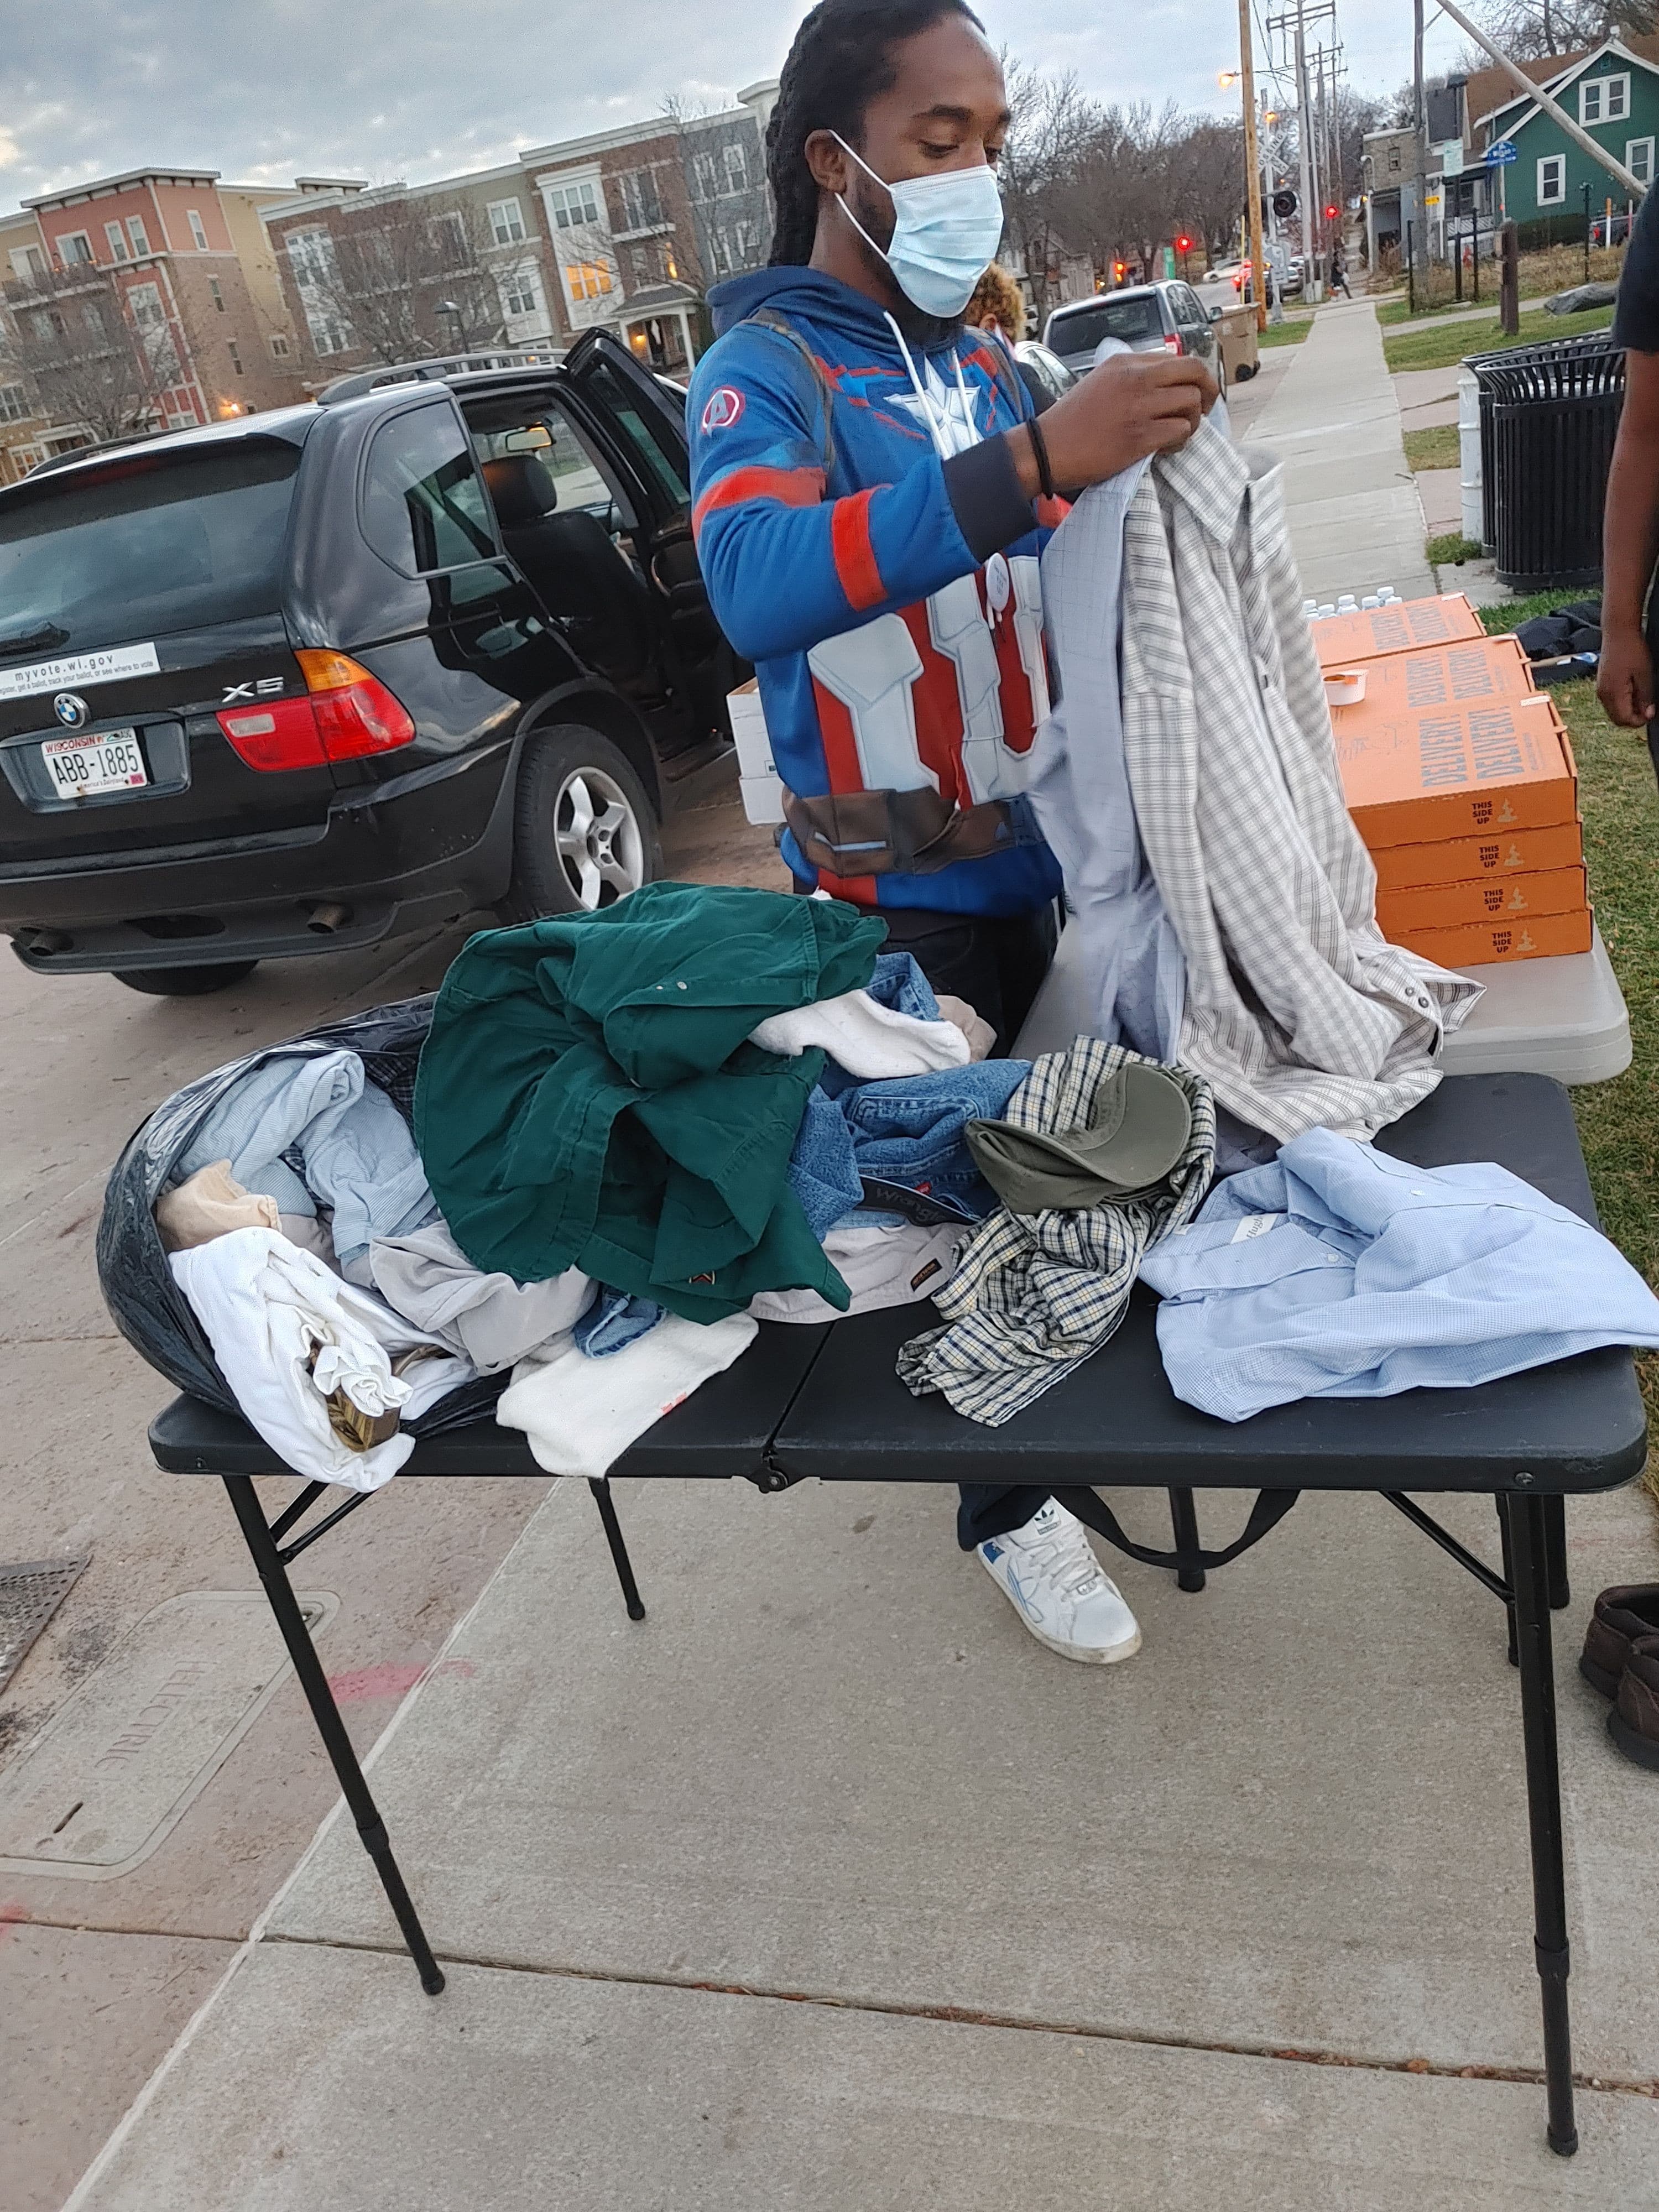 Rodney volunteering with Black Umbrella donate clothing and food in the cold winter days